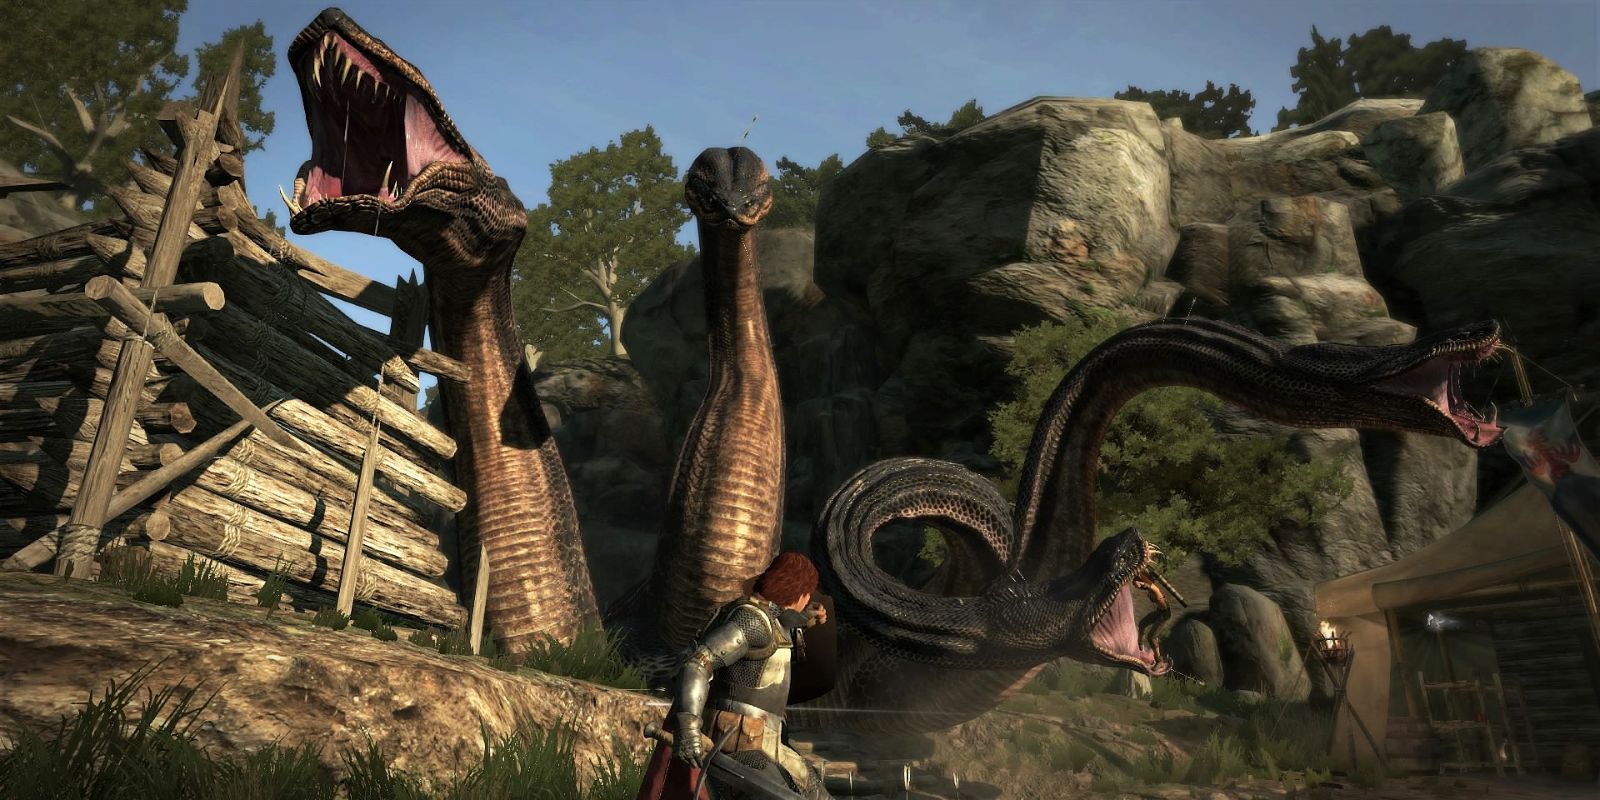 Dragon's Dogma 2: Mods From The Original That Should Be In The Sequel